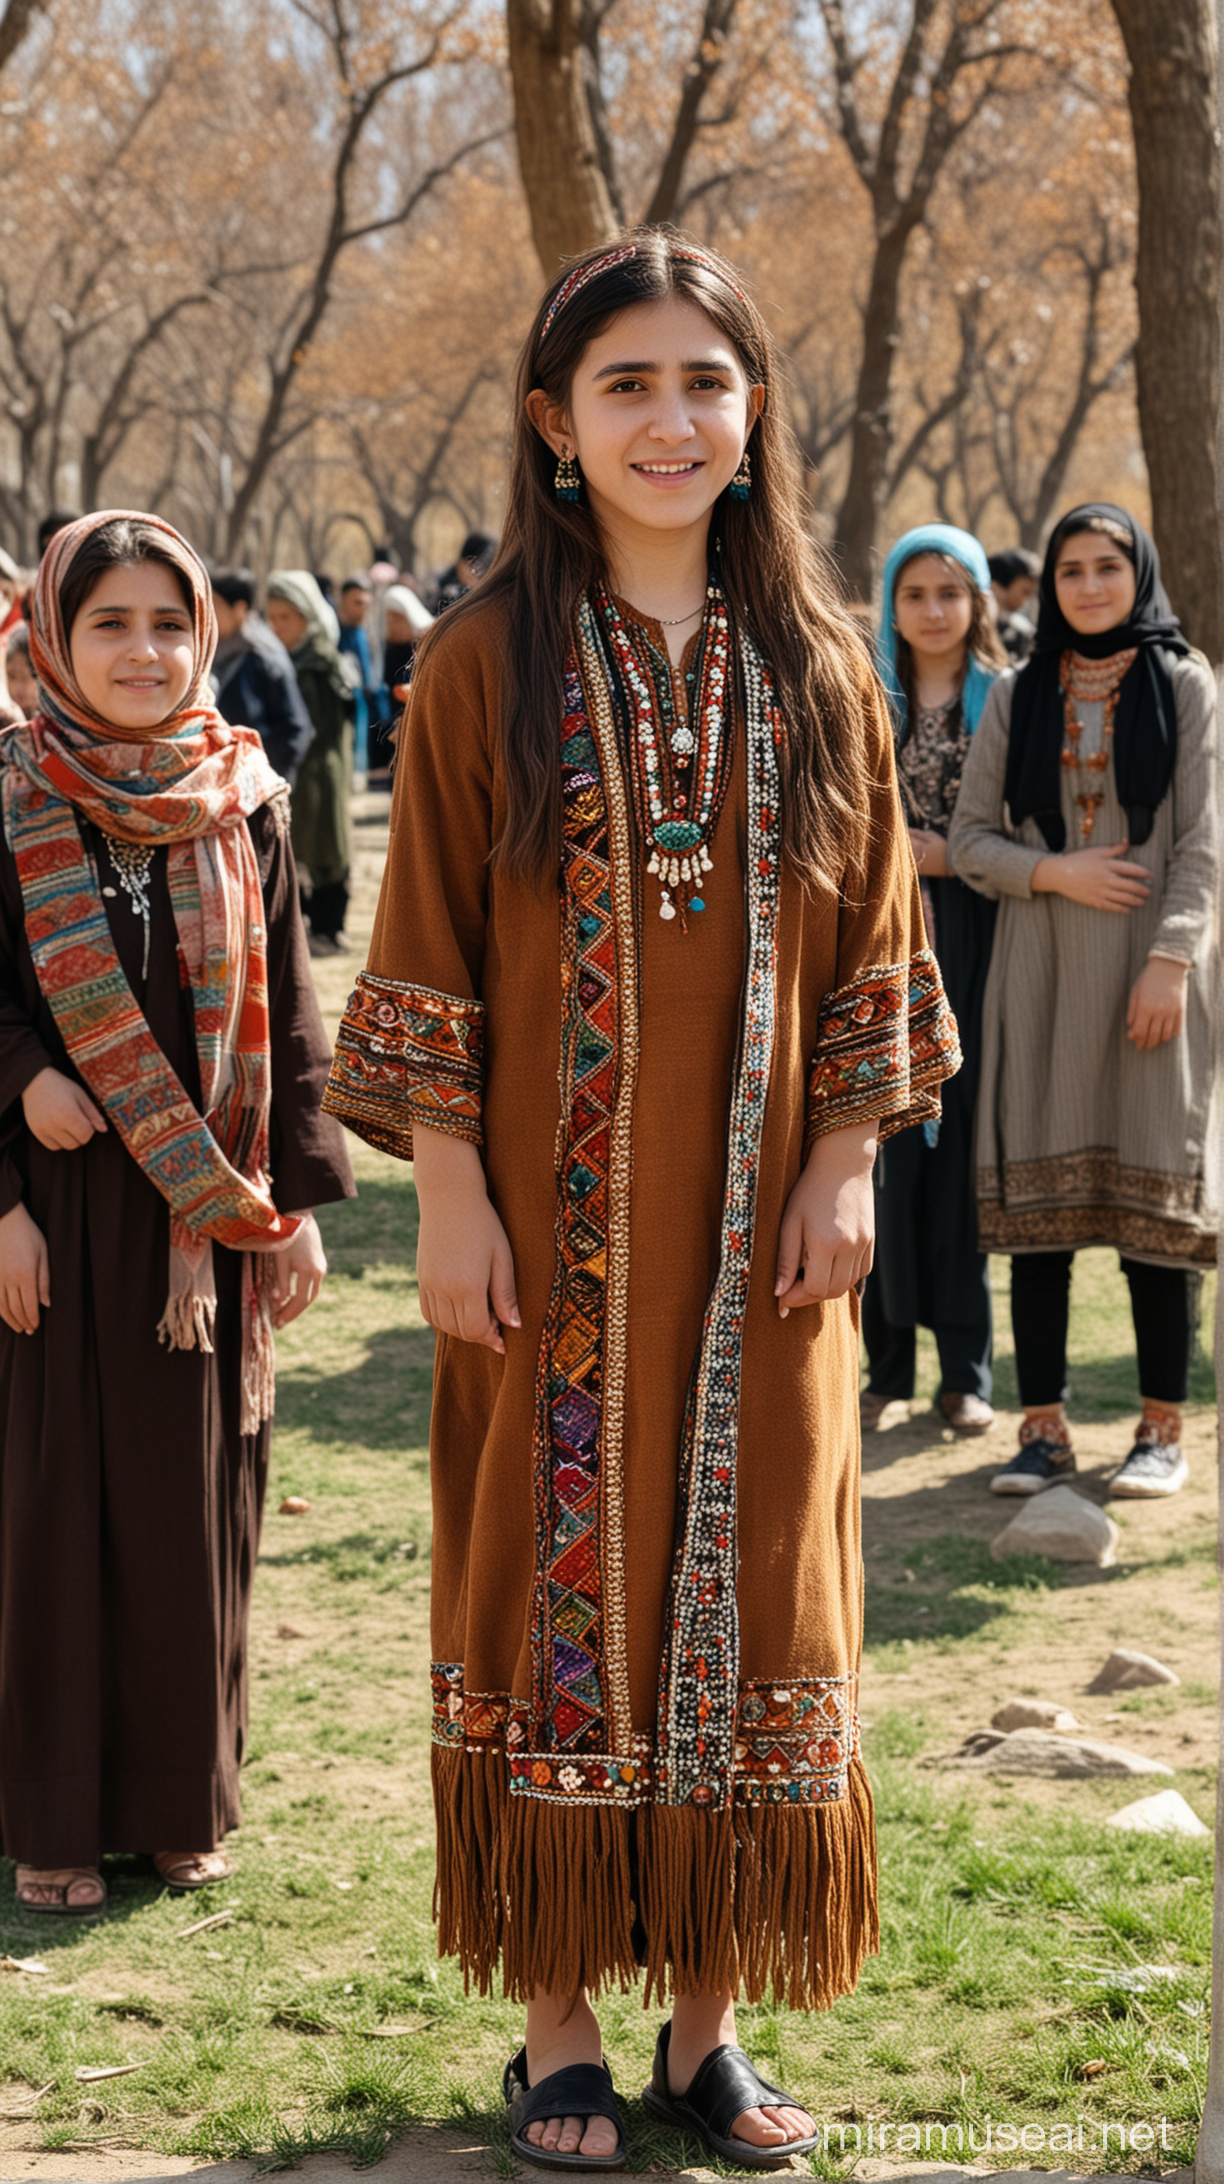 An Afghan-Tajik girl stand with Neanderthal women. They are at a park,
During spring and celebrating Naw Roz in March 20, 2024. (Persian feast).
